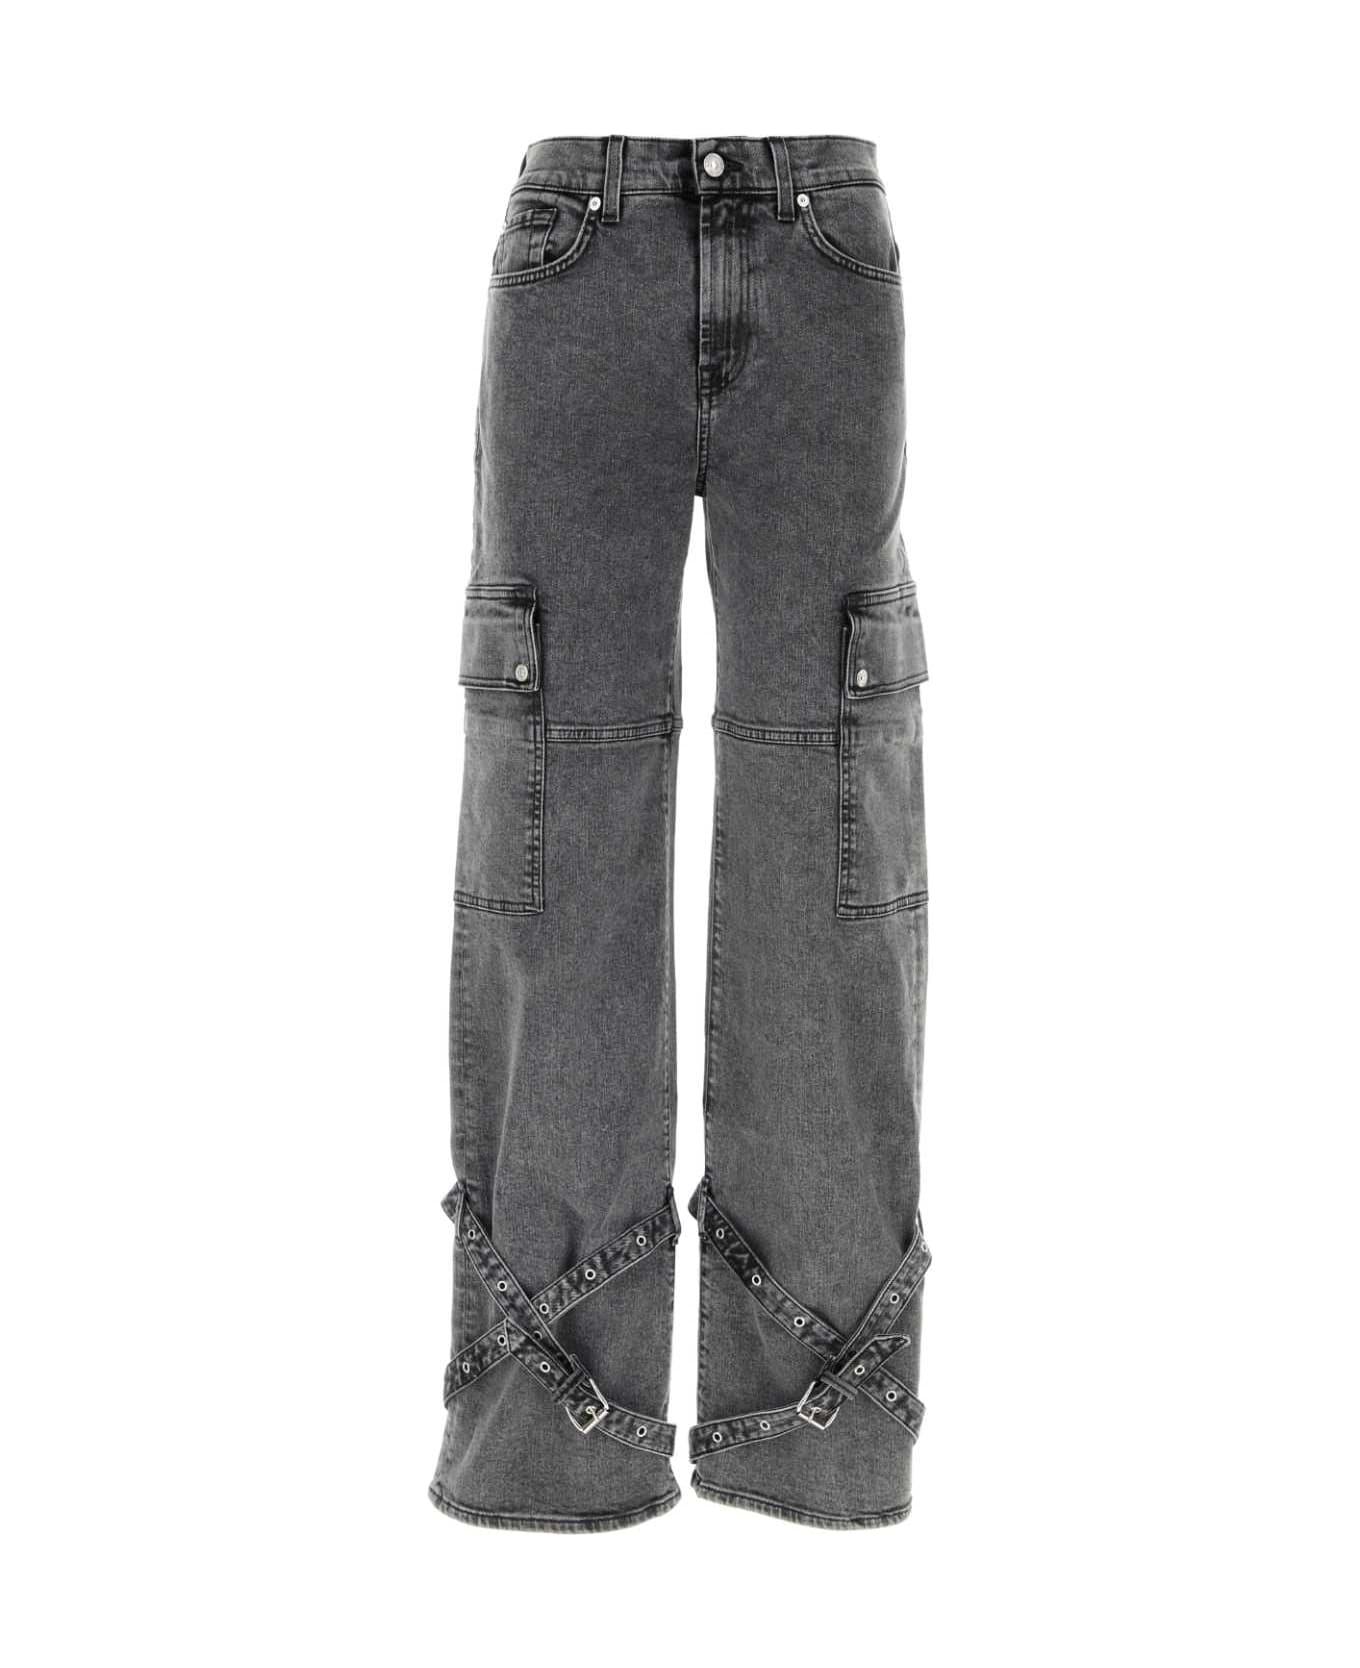 7 For All Mankind Jeans - GRIGIO